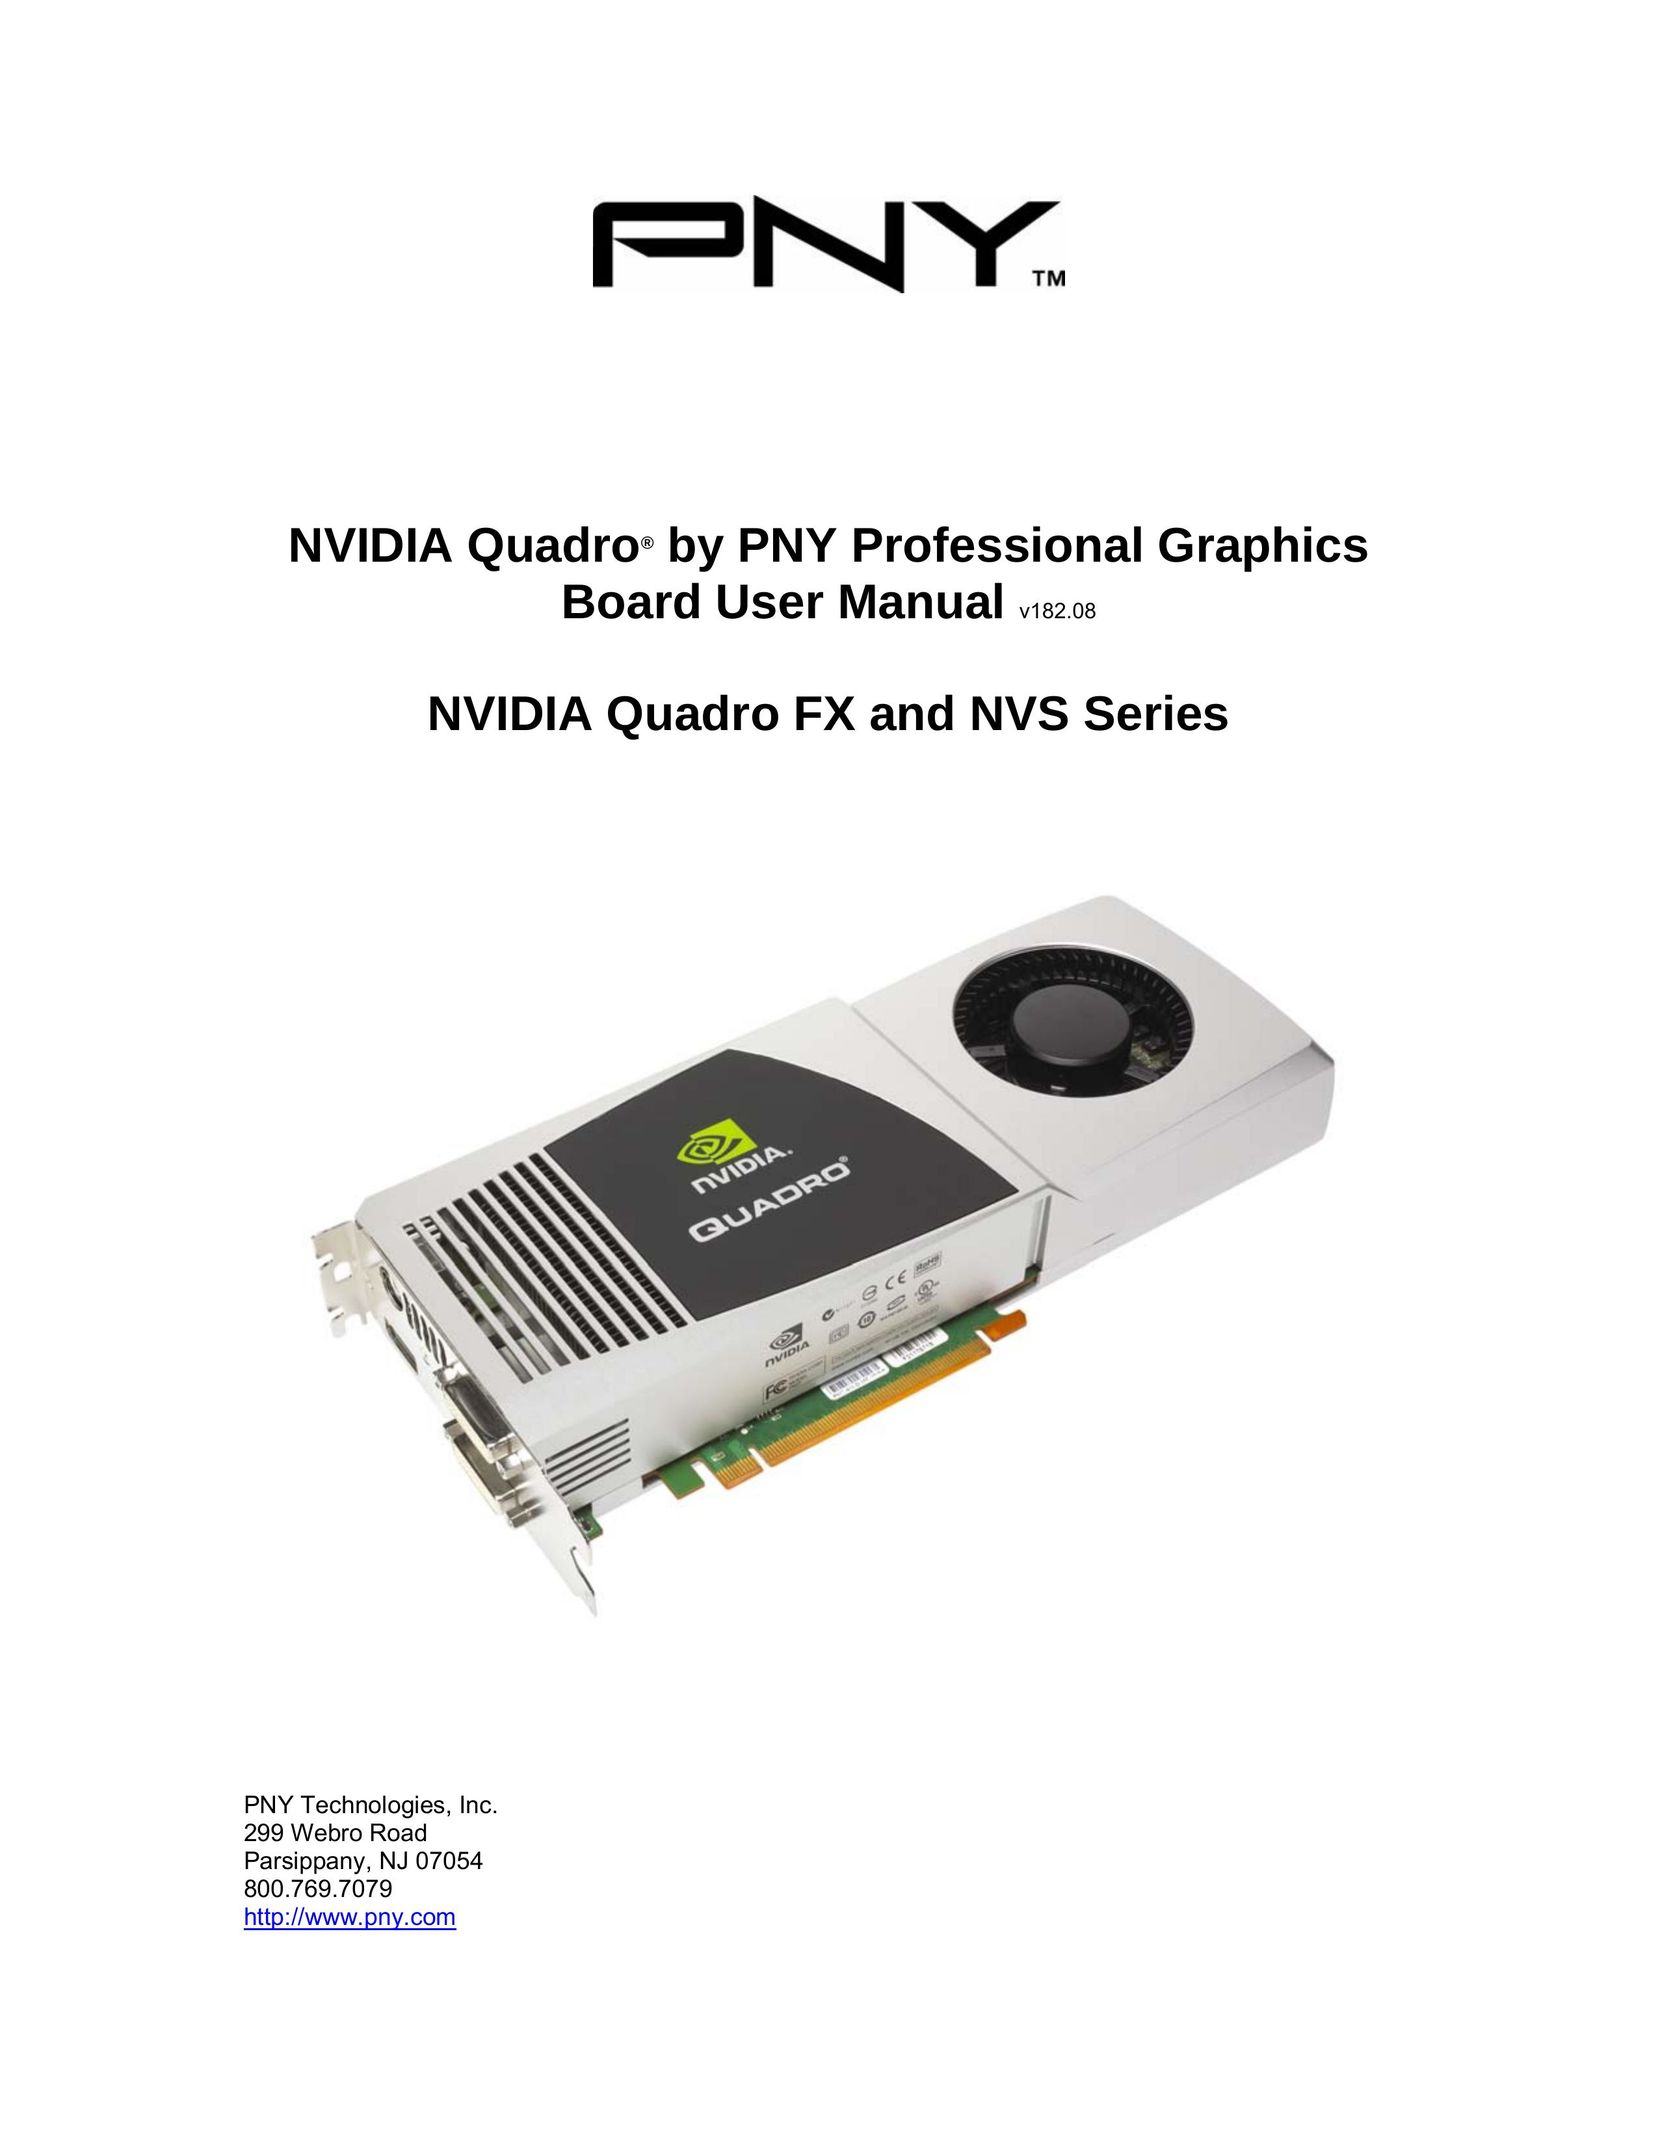 PNY FX 1800 Computer Hardware User Manual